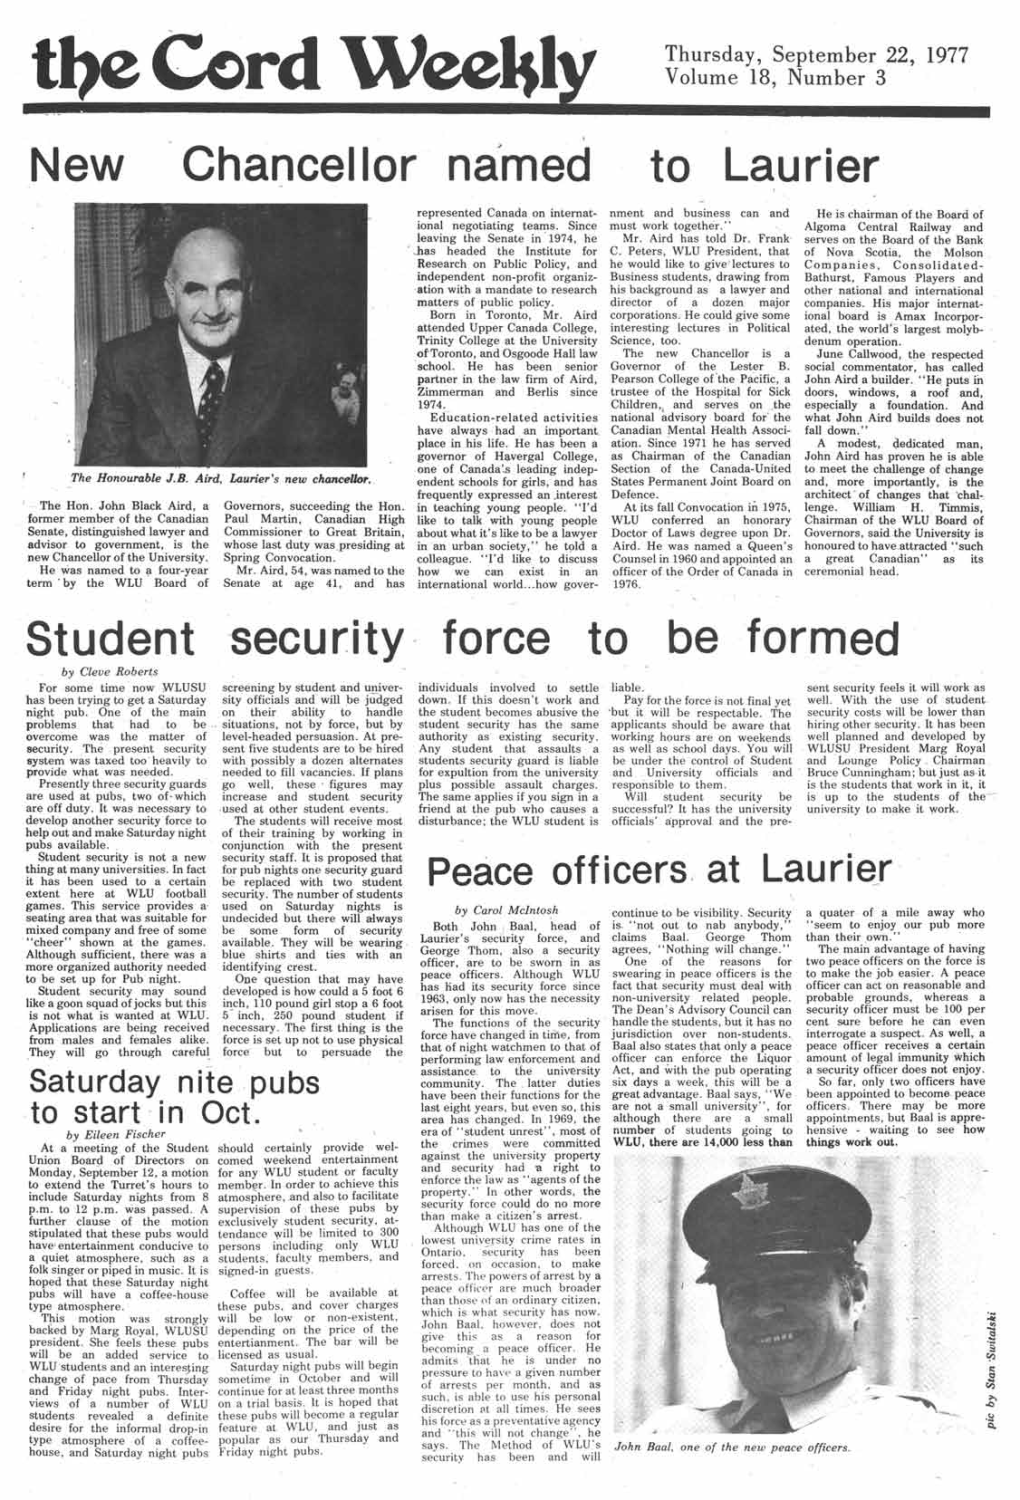 The Cord Weekly (September 22, 1977)